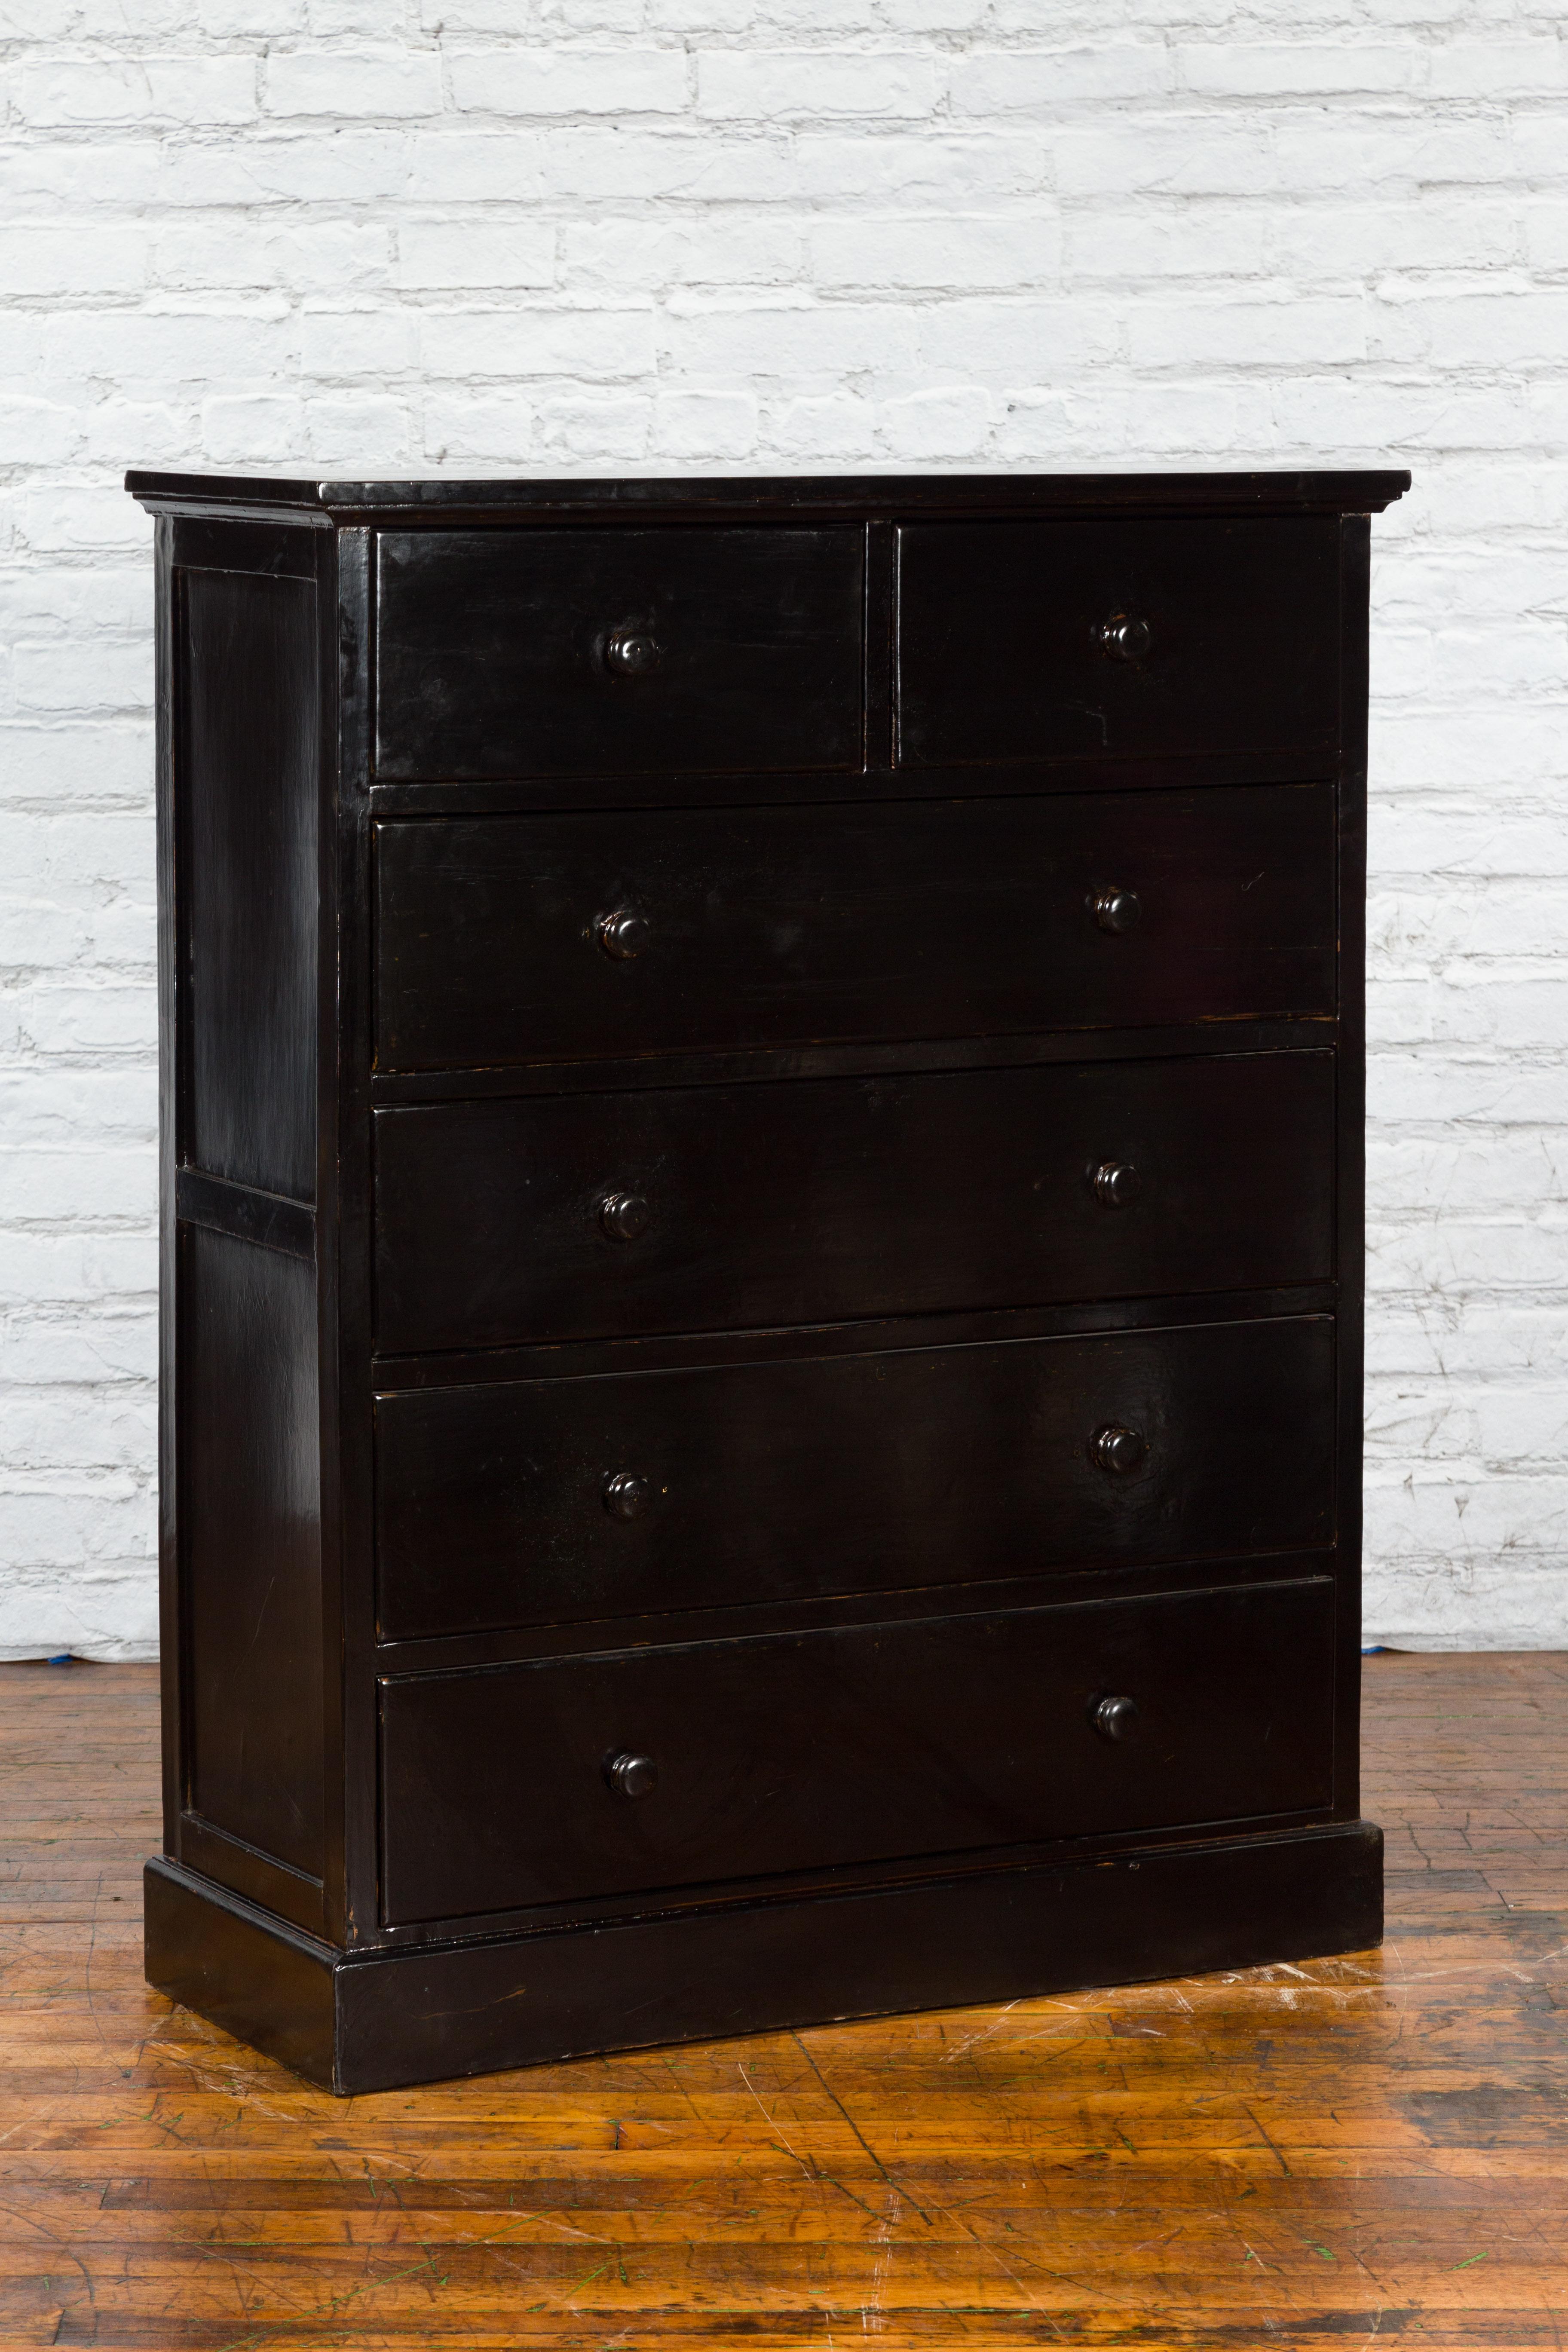 A tall vintage Chinese black lacquered elm wood chest from the late 20th century with six drawers and wooden pulls. Created in China during the second half of the 20th century, this tall chest, made of recovered elmwood, exhibits a thoroughly